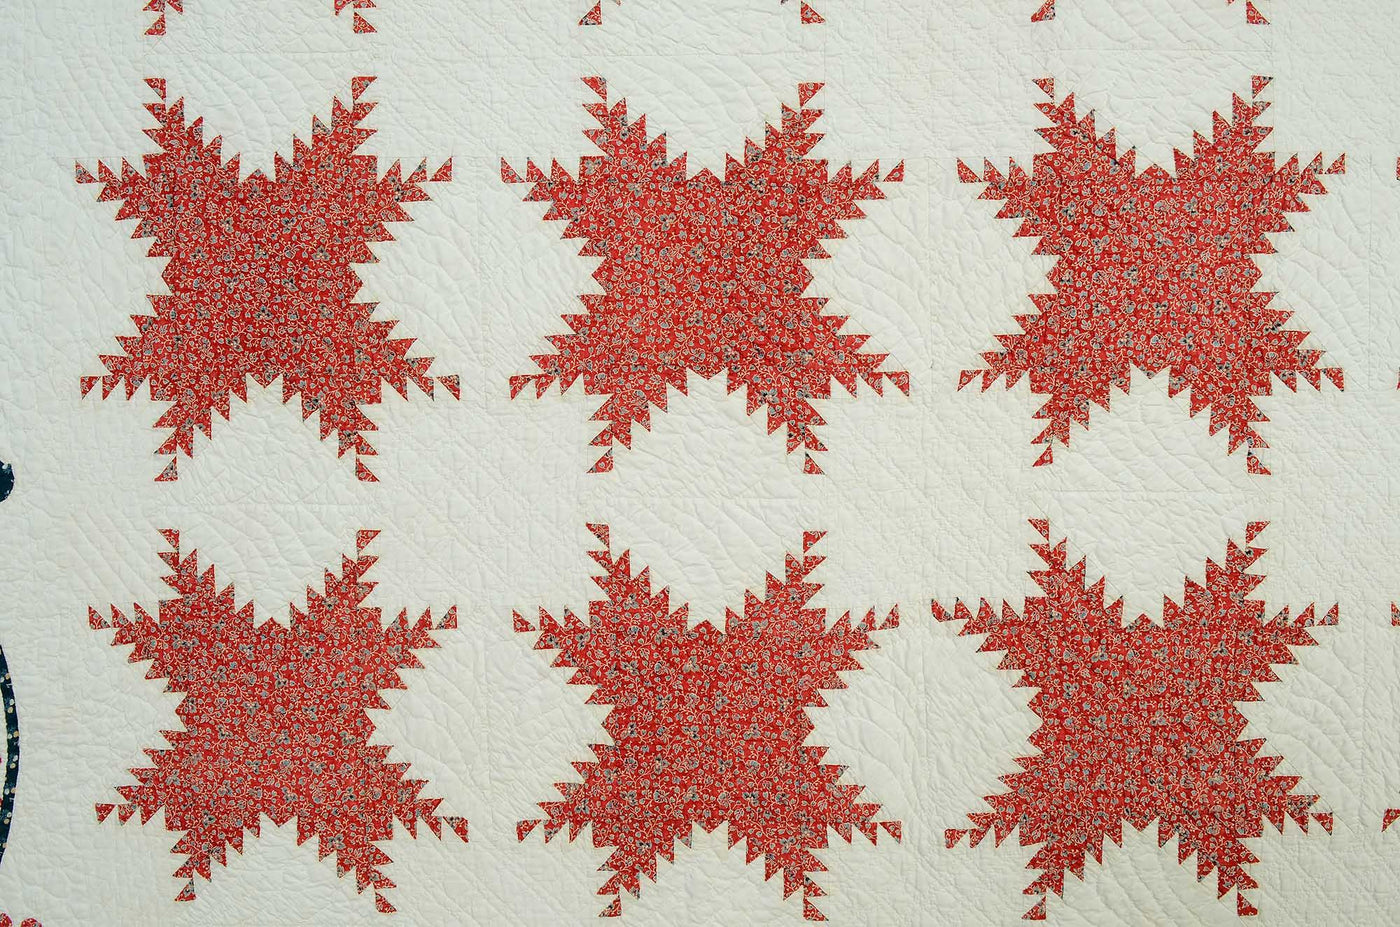 feathered-stars-quilt-with-applique-1405263-stars-detail-3